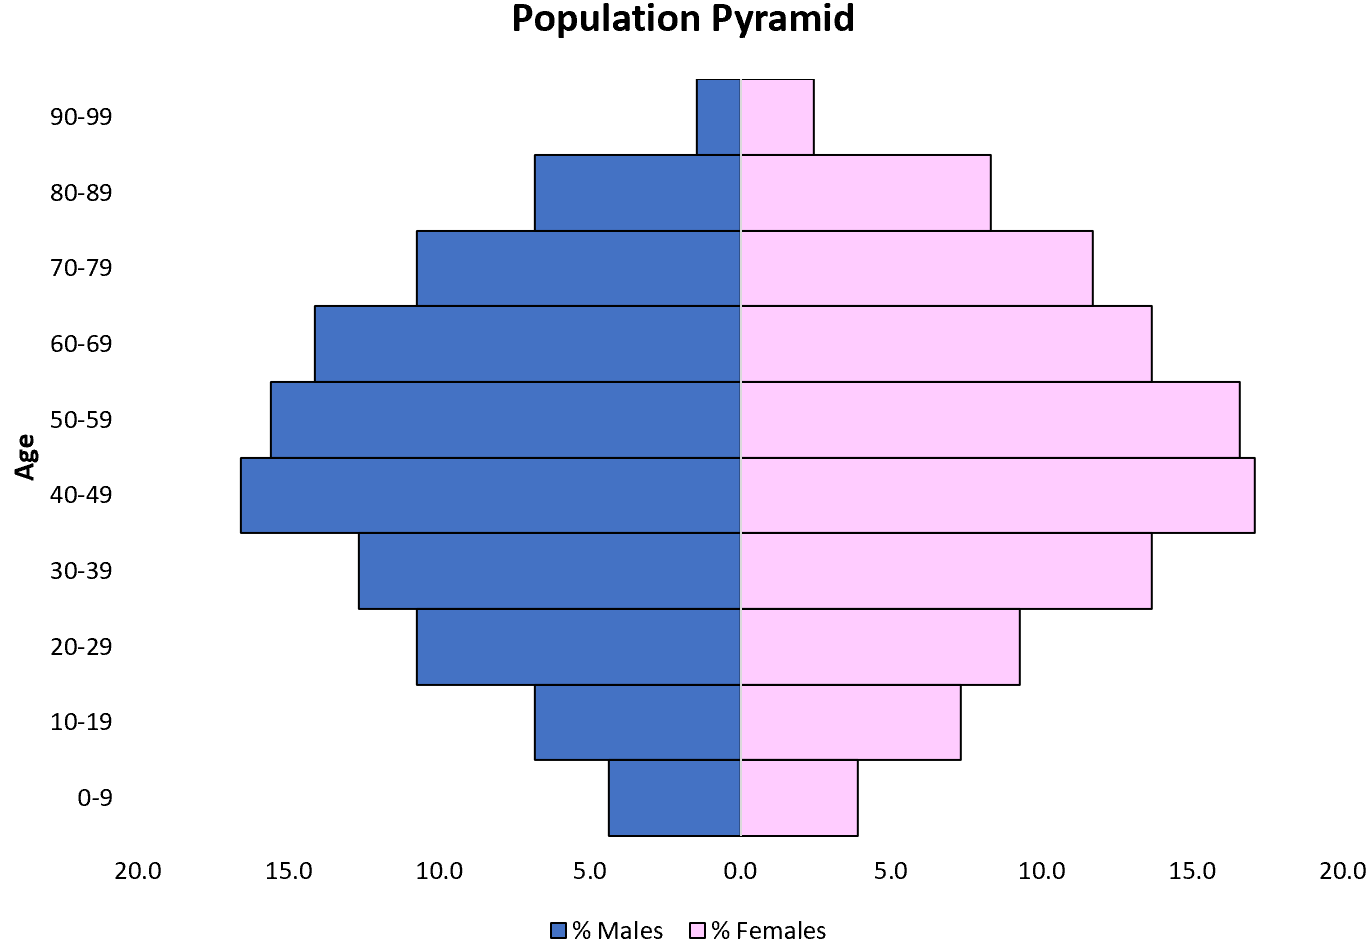 Population pyramid in Excel